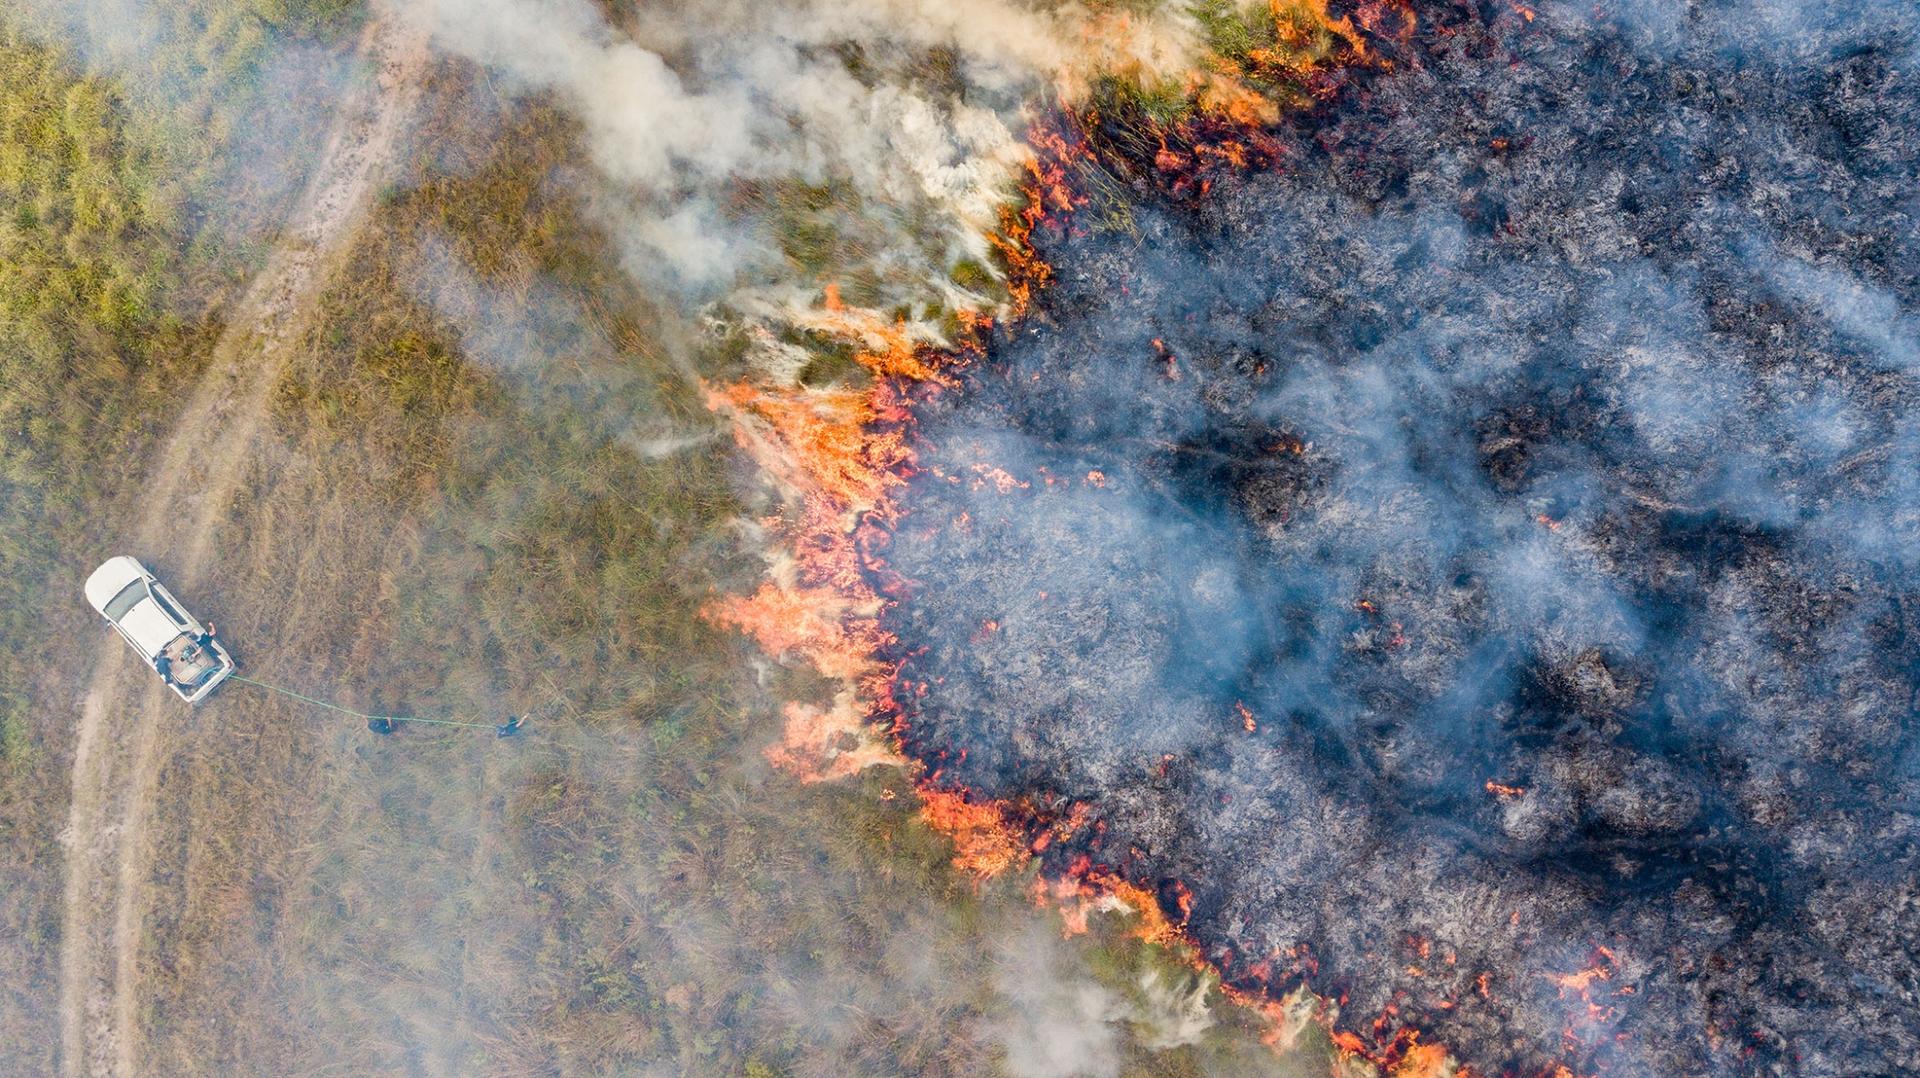 Aerial shot of wildfires burning parts of the Iberá wetlands in northern Argentina